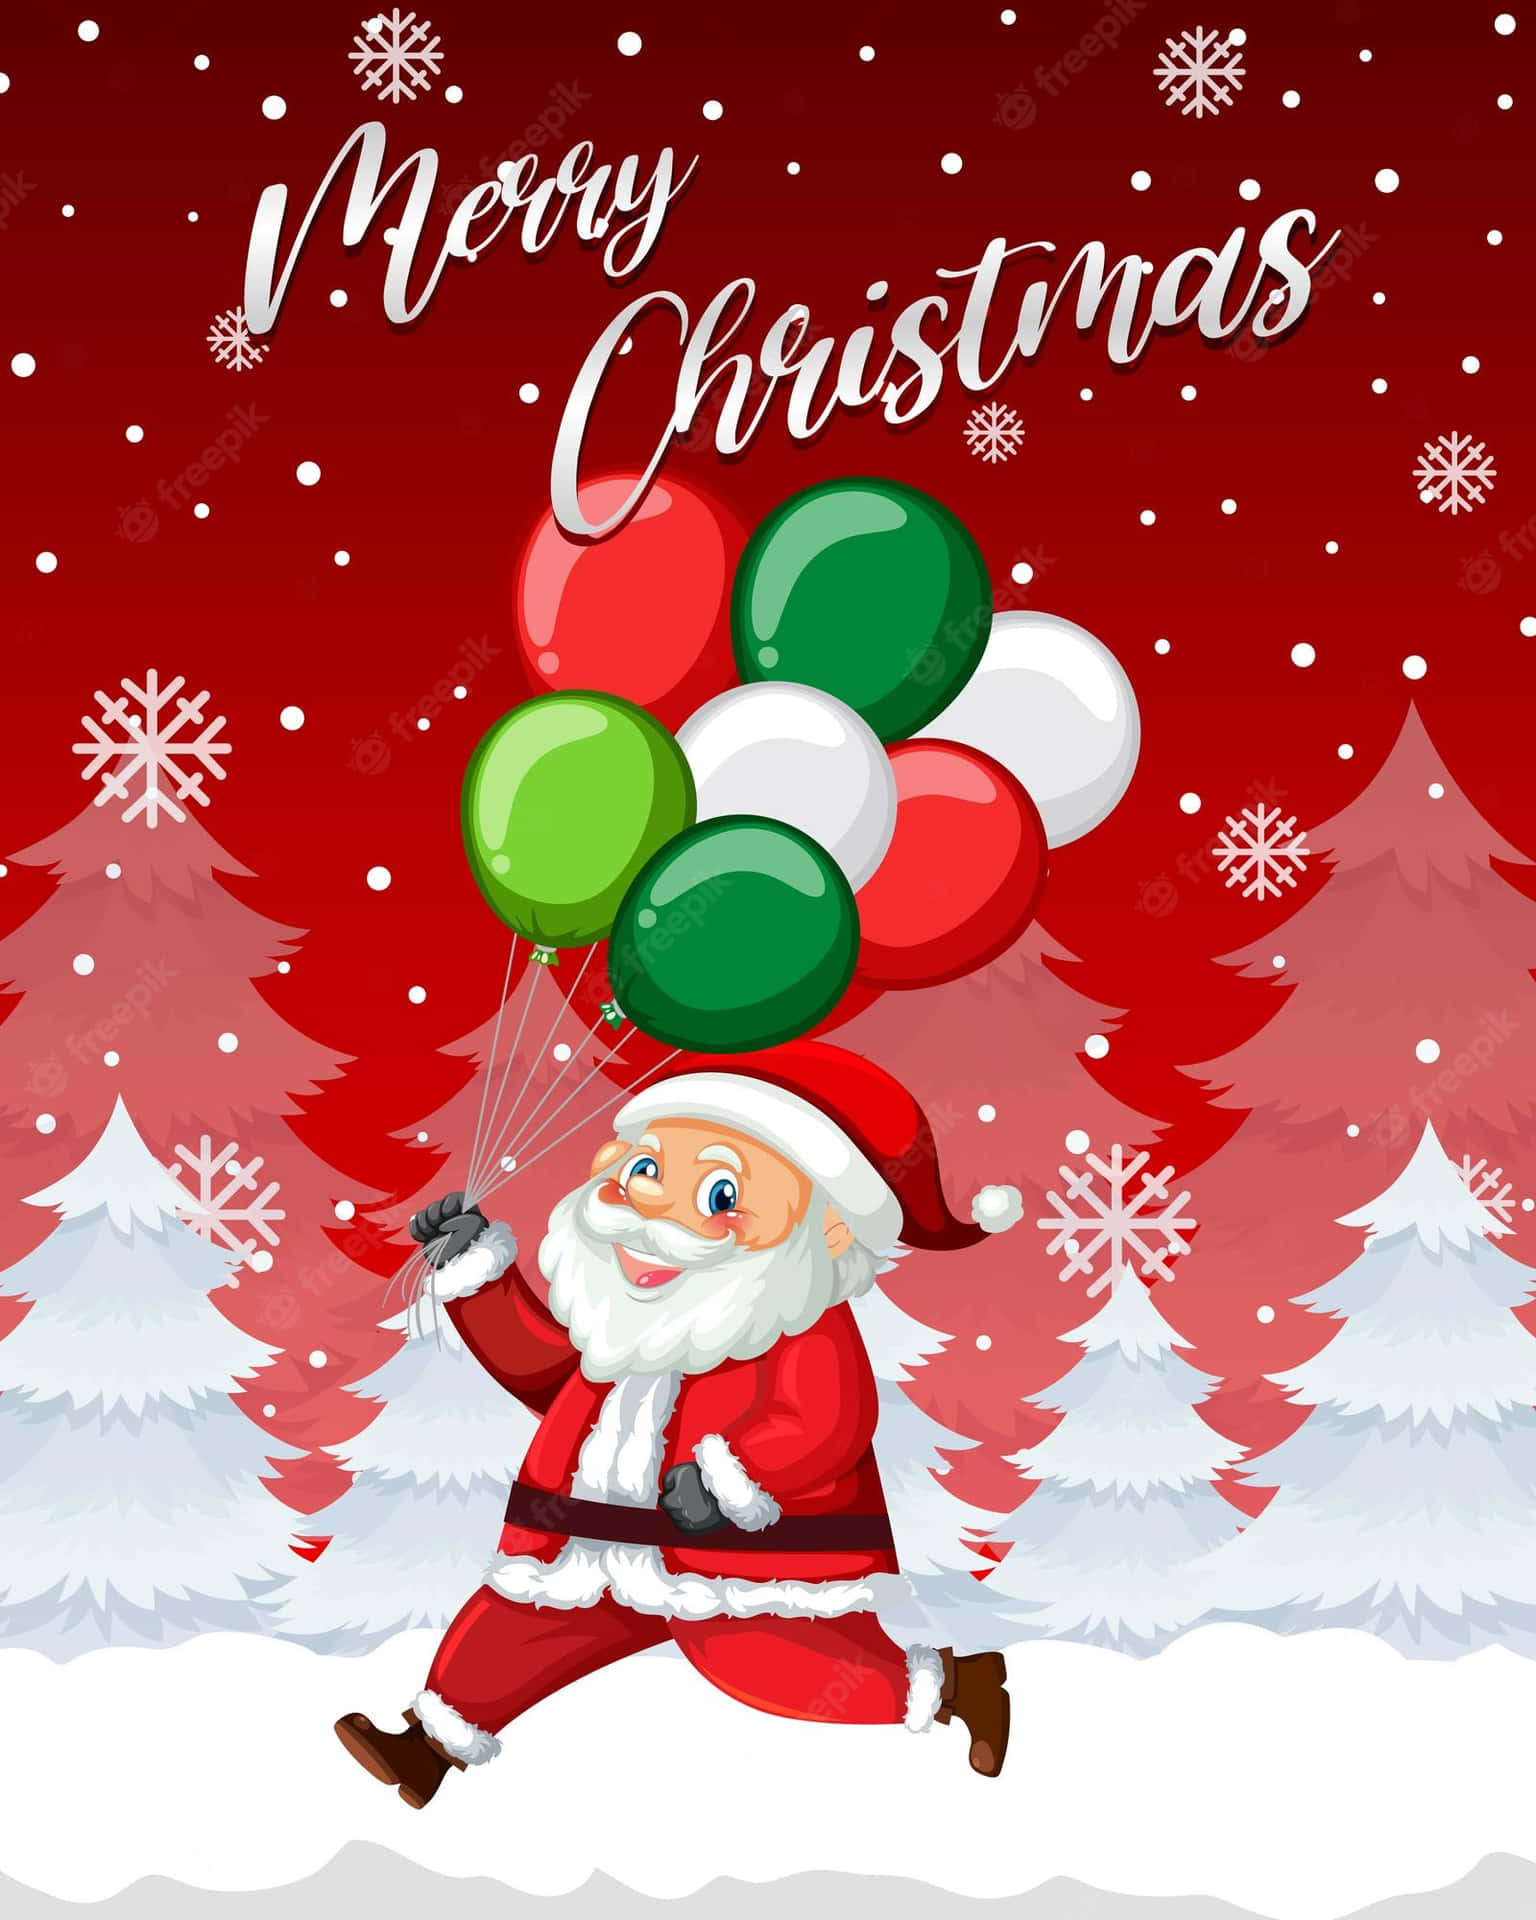 Santa Claus With Balloons And Christmas Tree